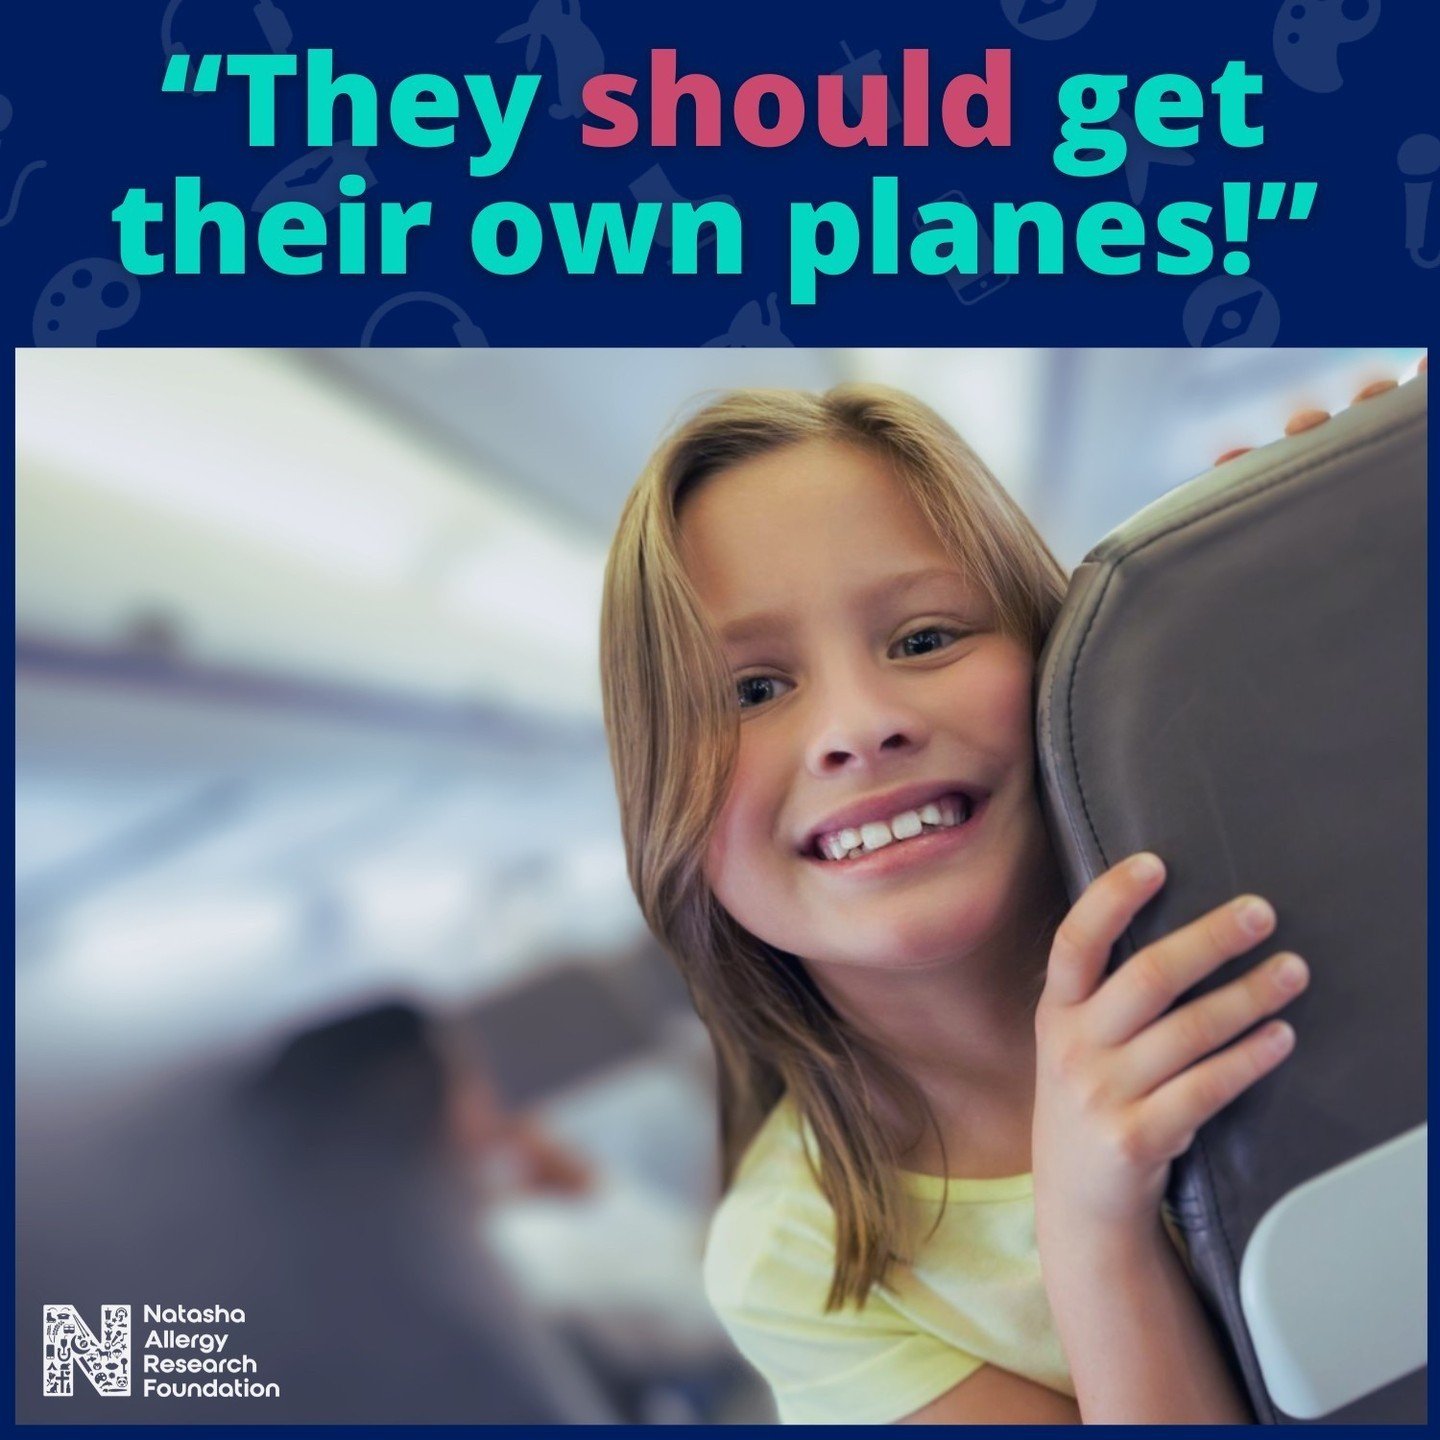 Has your child ever had to explain the seriousness of their food allergies to adults?

&quot;My 12-year-old daughter has food allergies and is at risk of anaphylaxis. On a recent flight, we heard a family sitting in front of us complaining about &quo